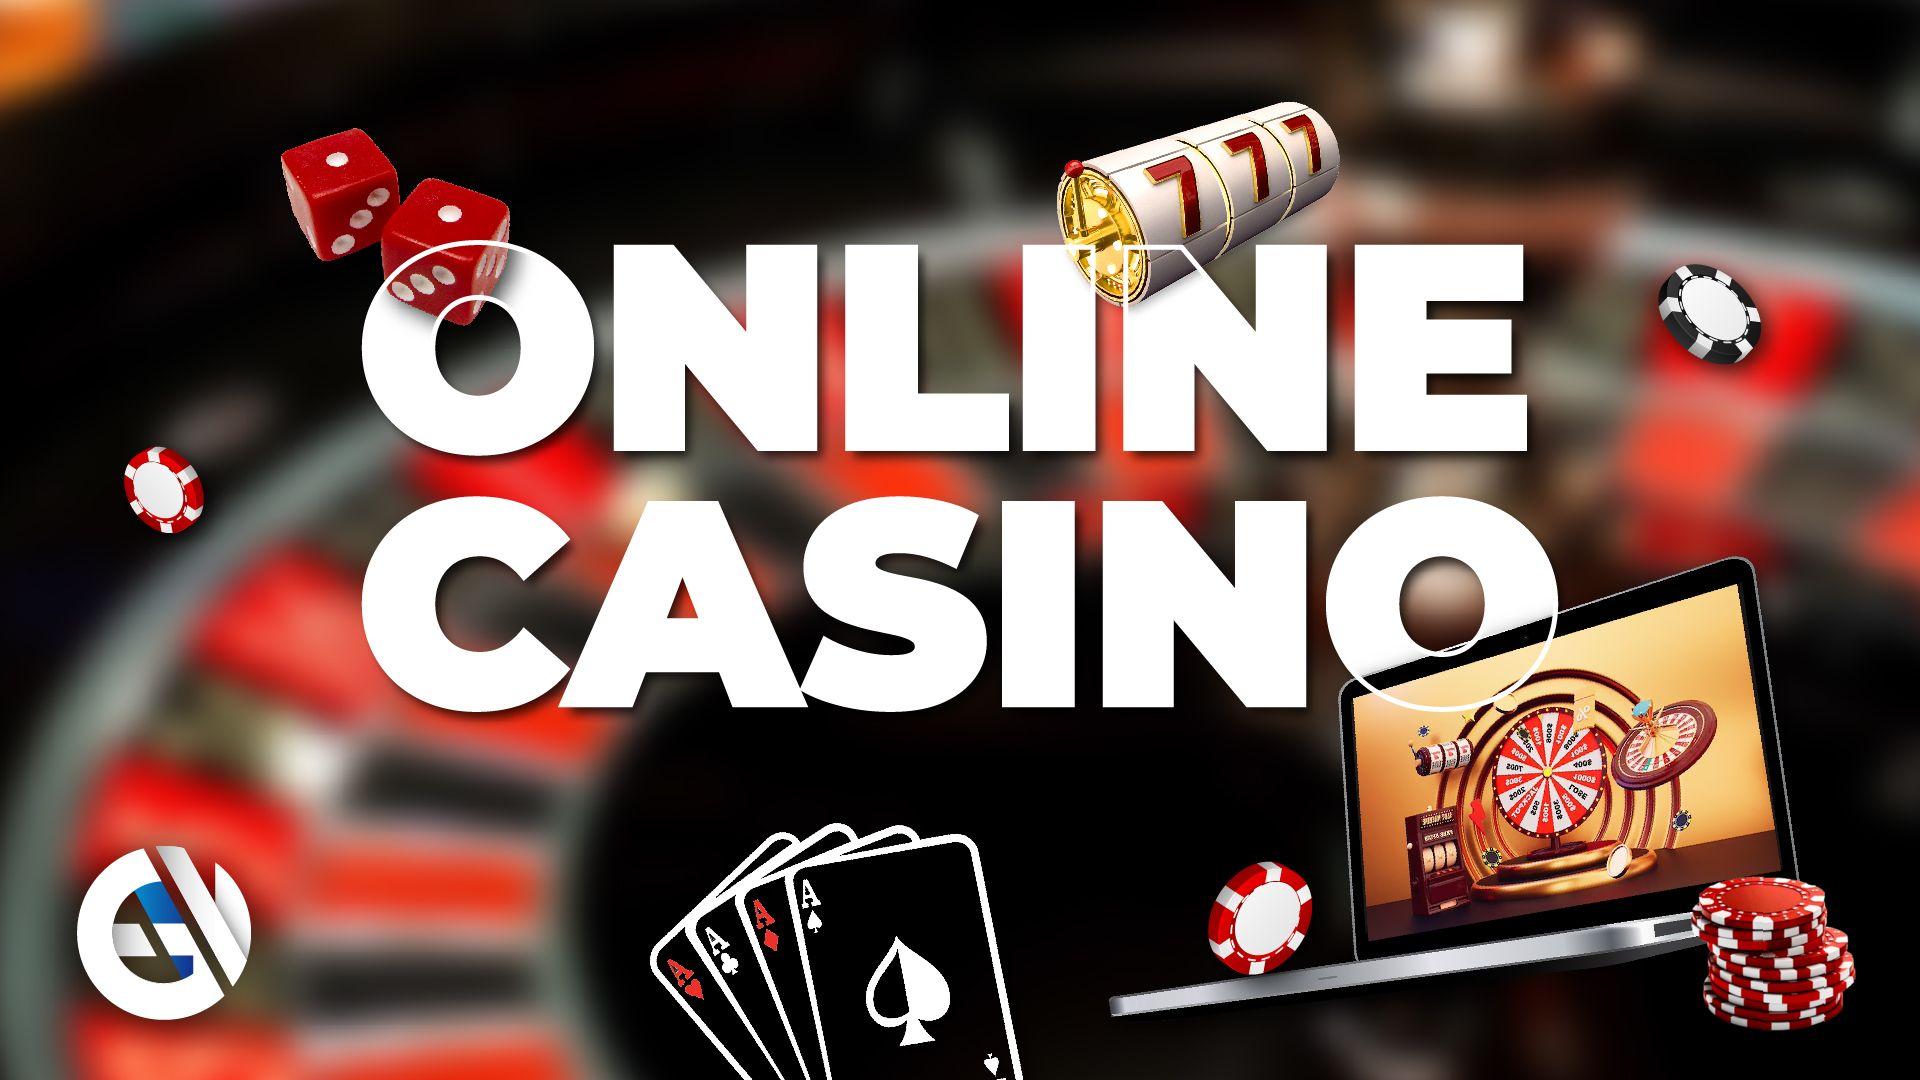 The most popular and latest online slots